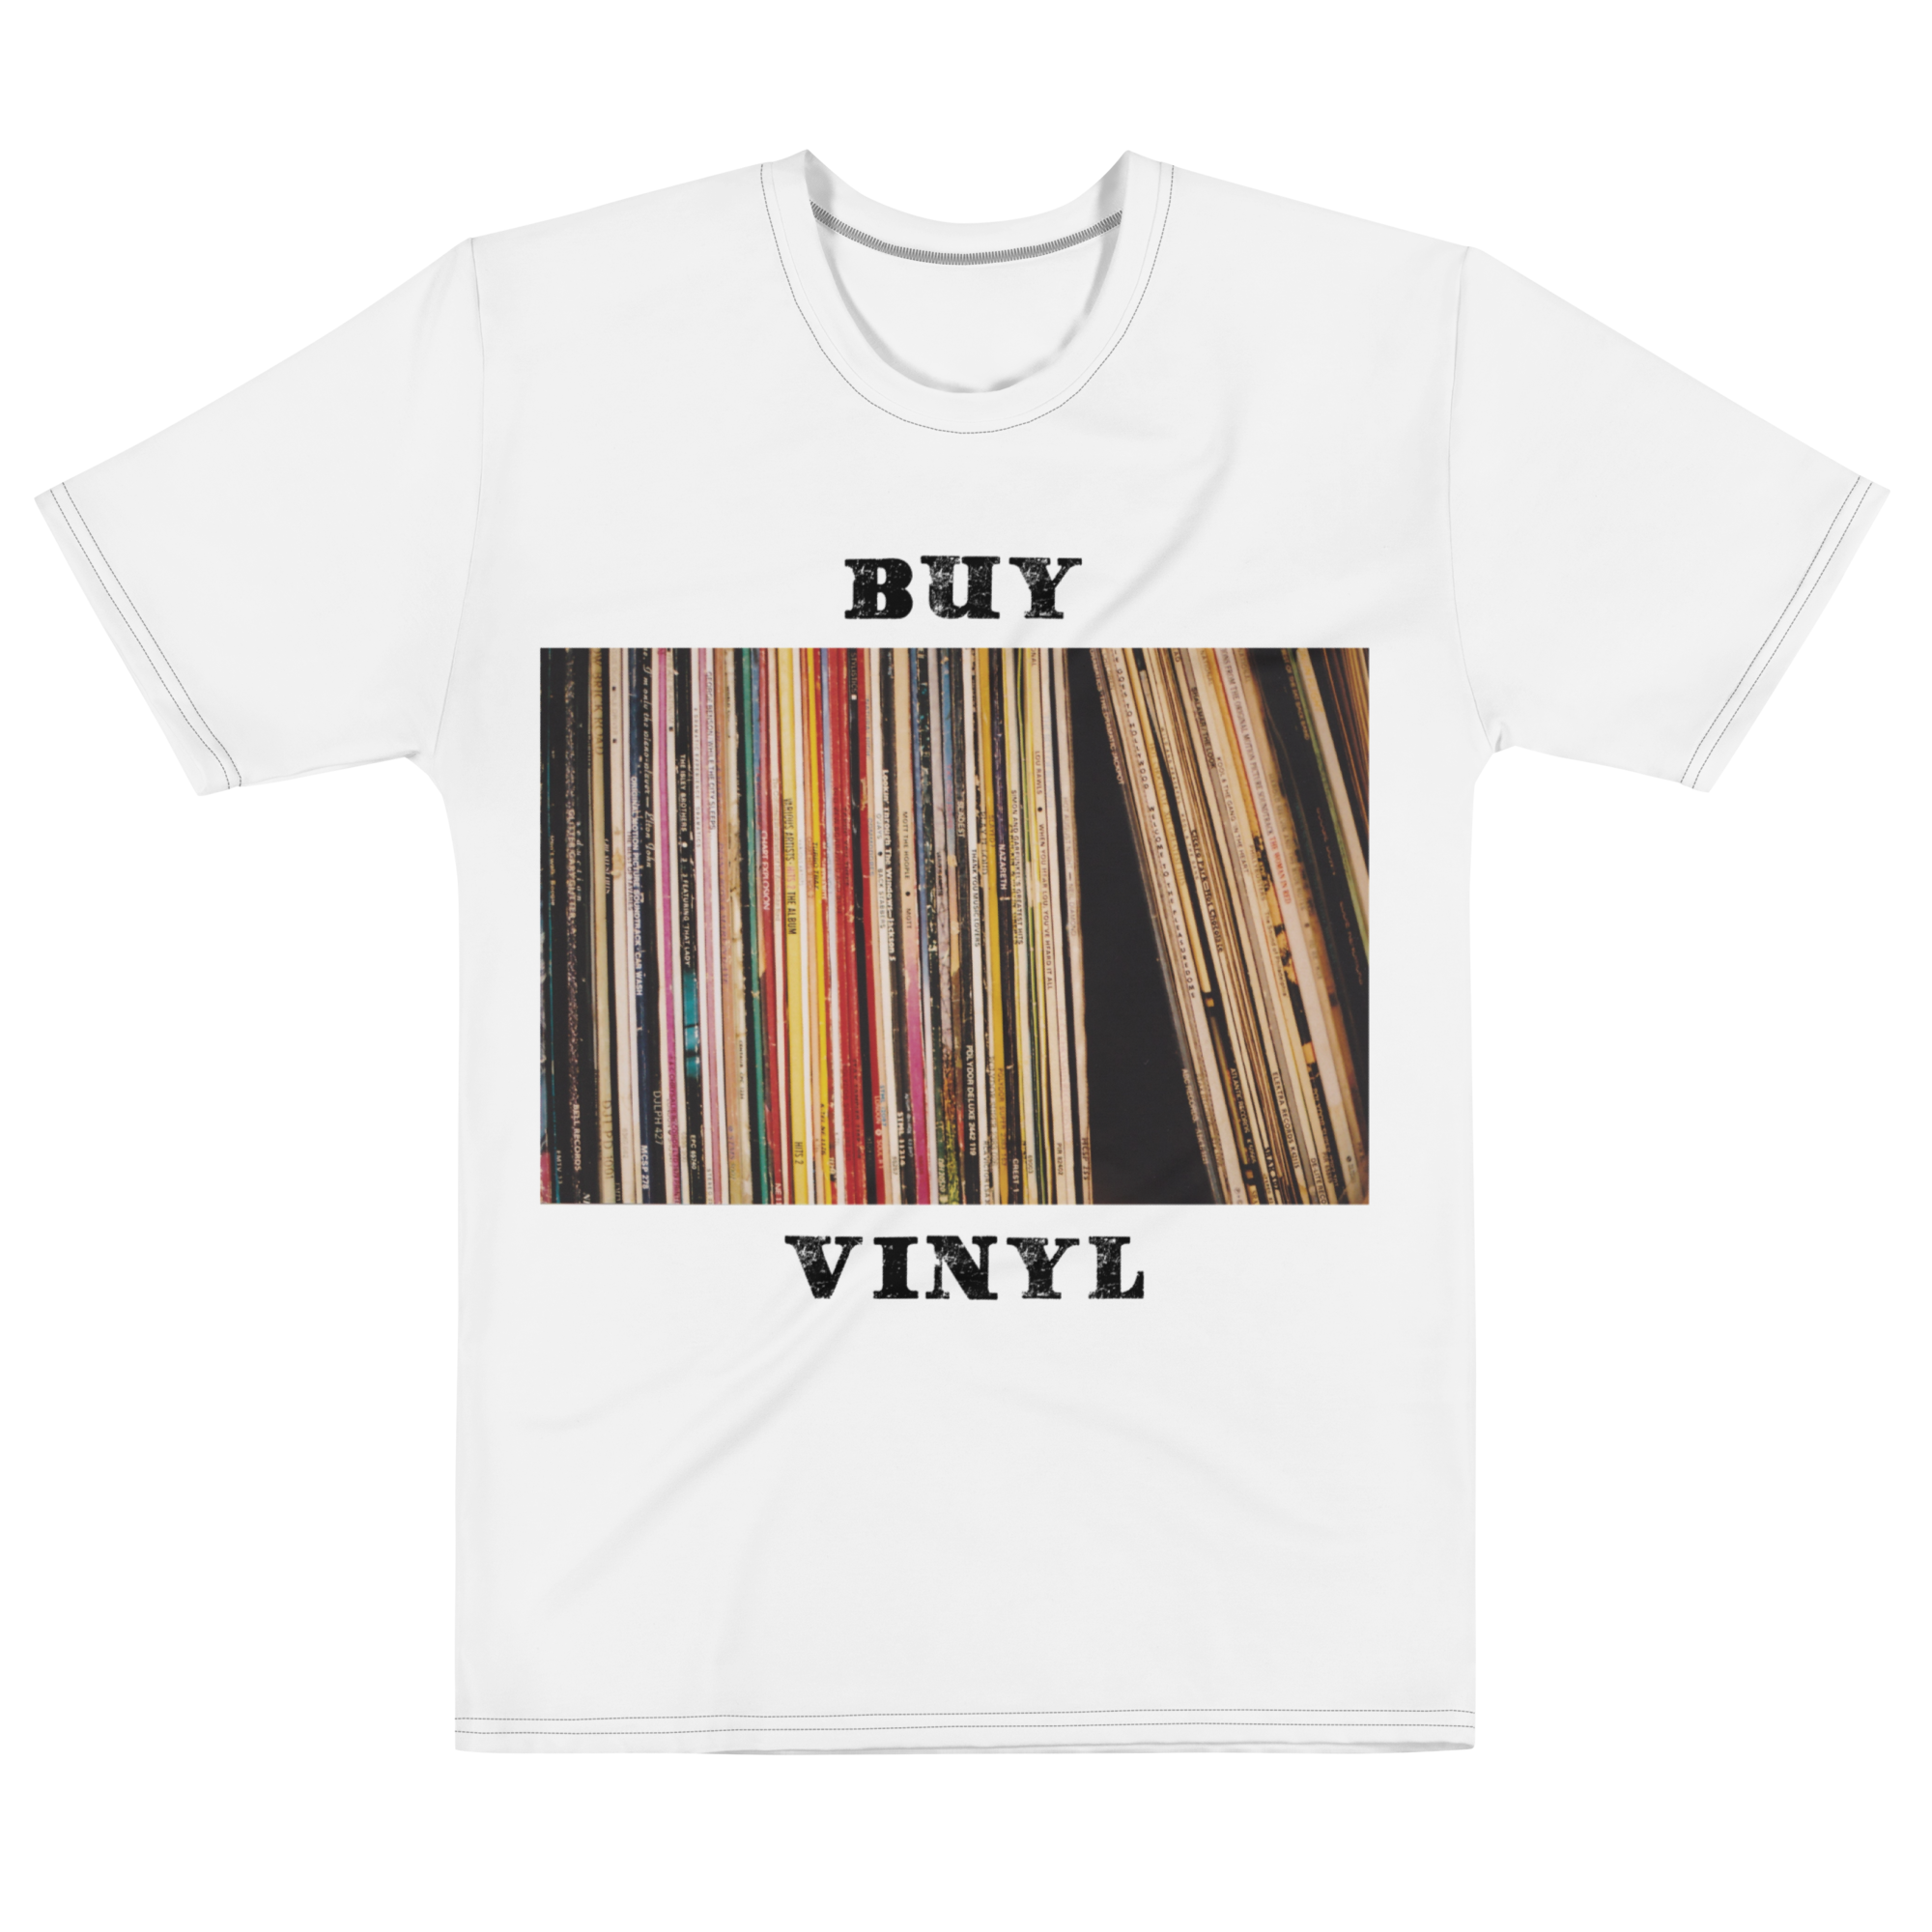 Vinyl Dreams T-Shirt: Relive the Magic of Old-School Records. Front White Shirt - Nostalgia and Captivating Art at CIA Clothing'